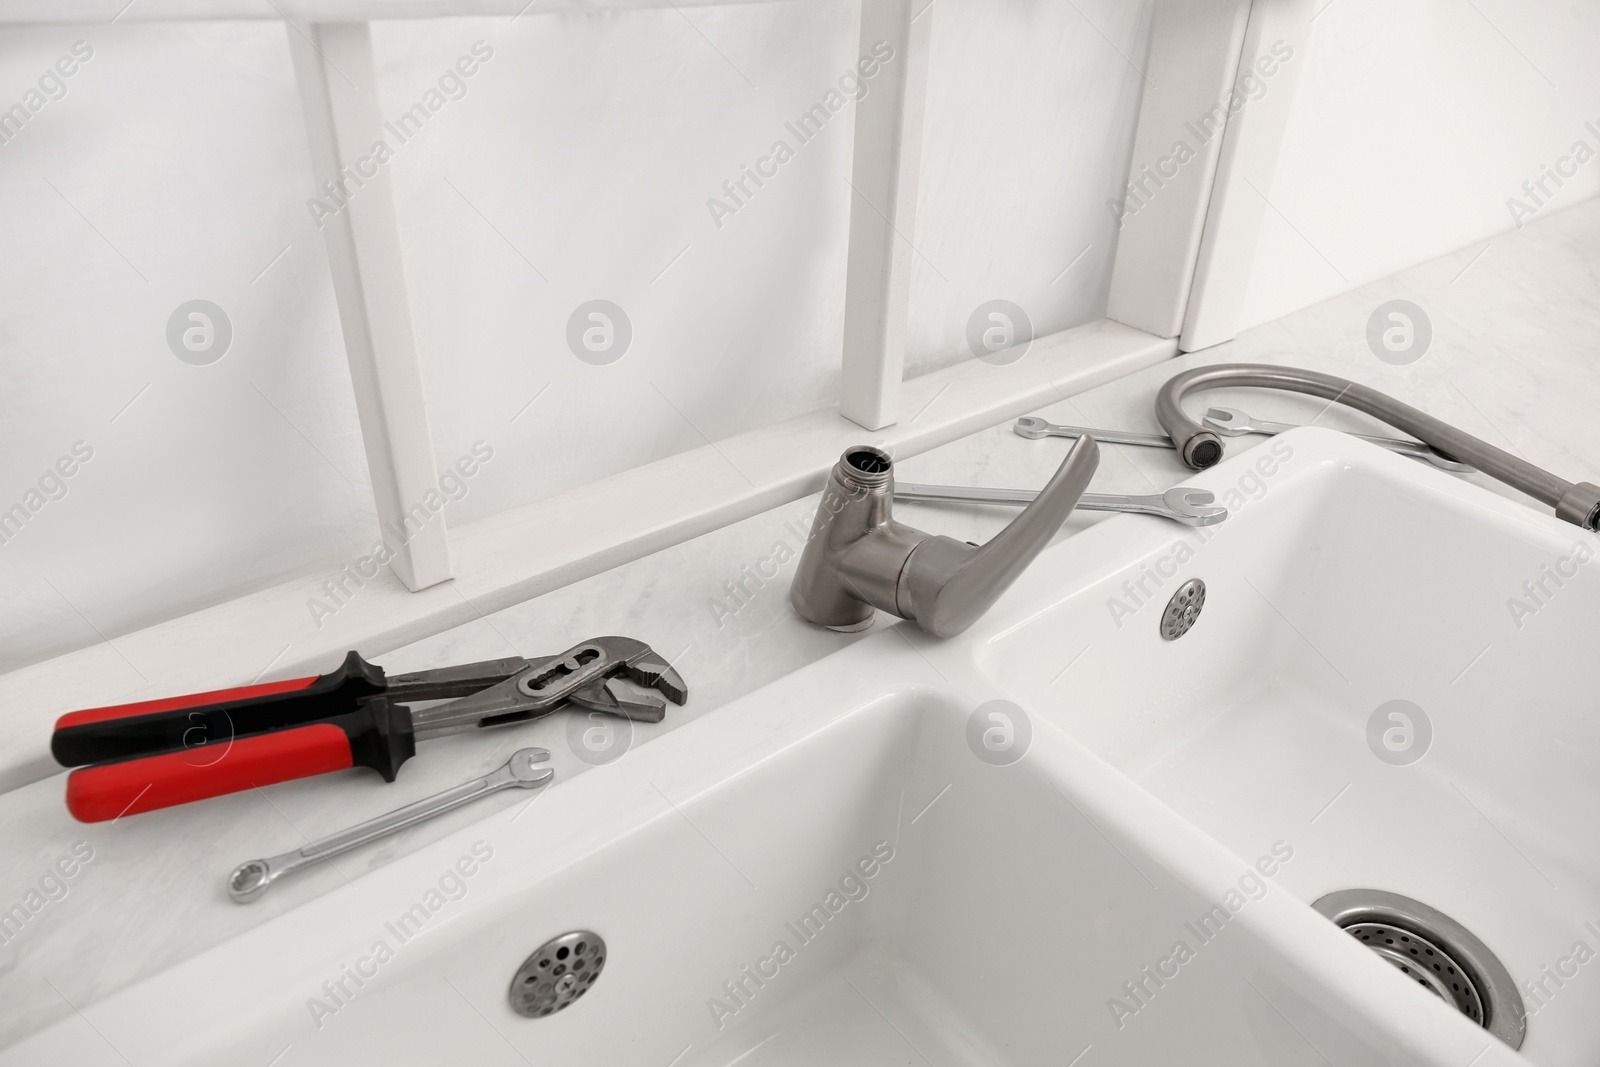 Photo of Plumber's tools and water tap ready for installation near sink on countertop in kitchen